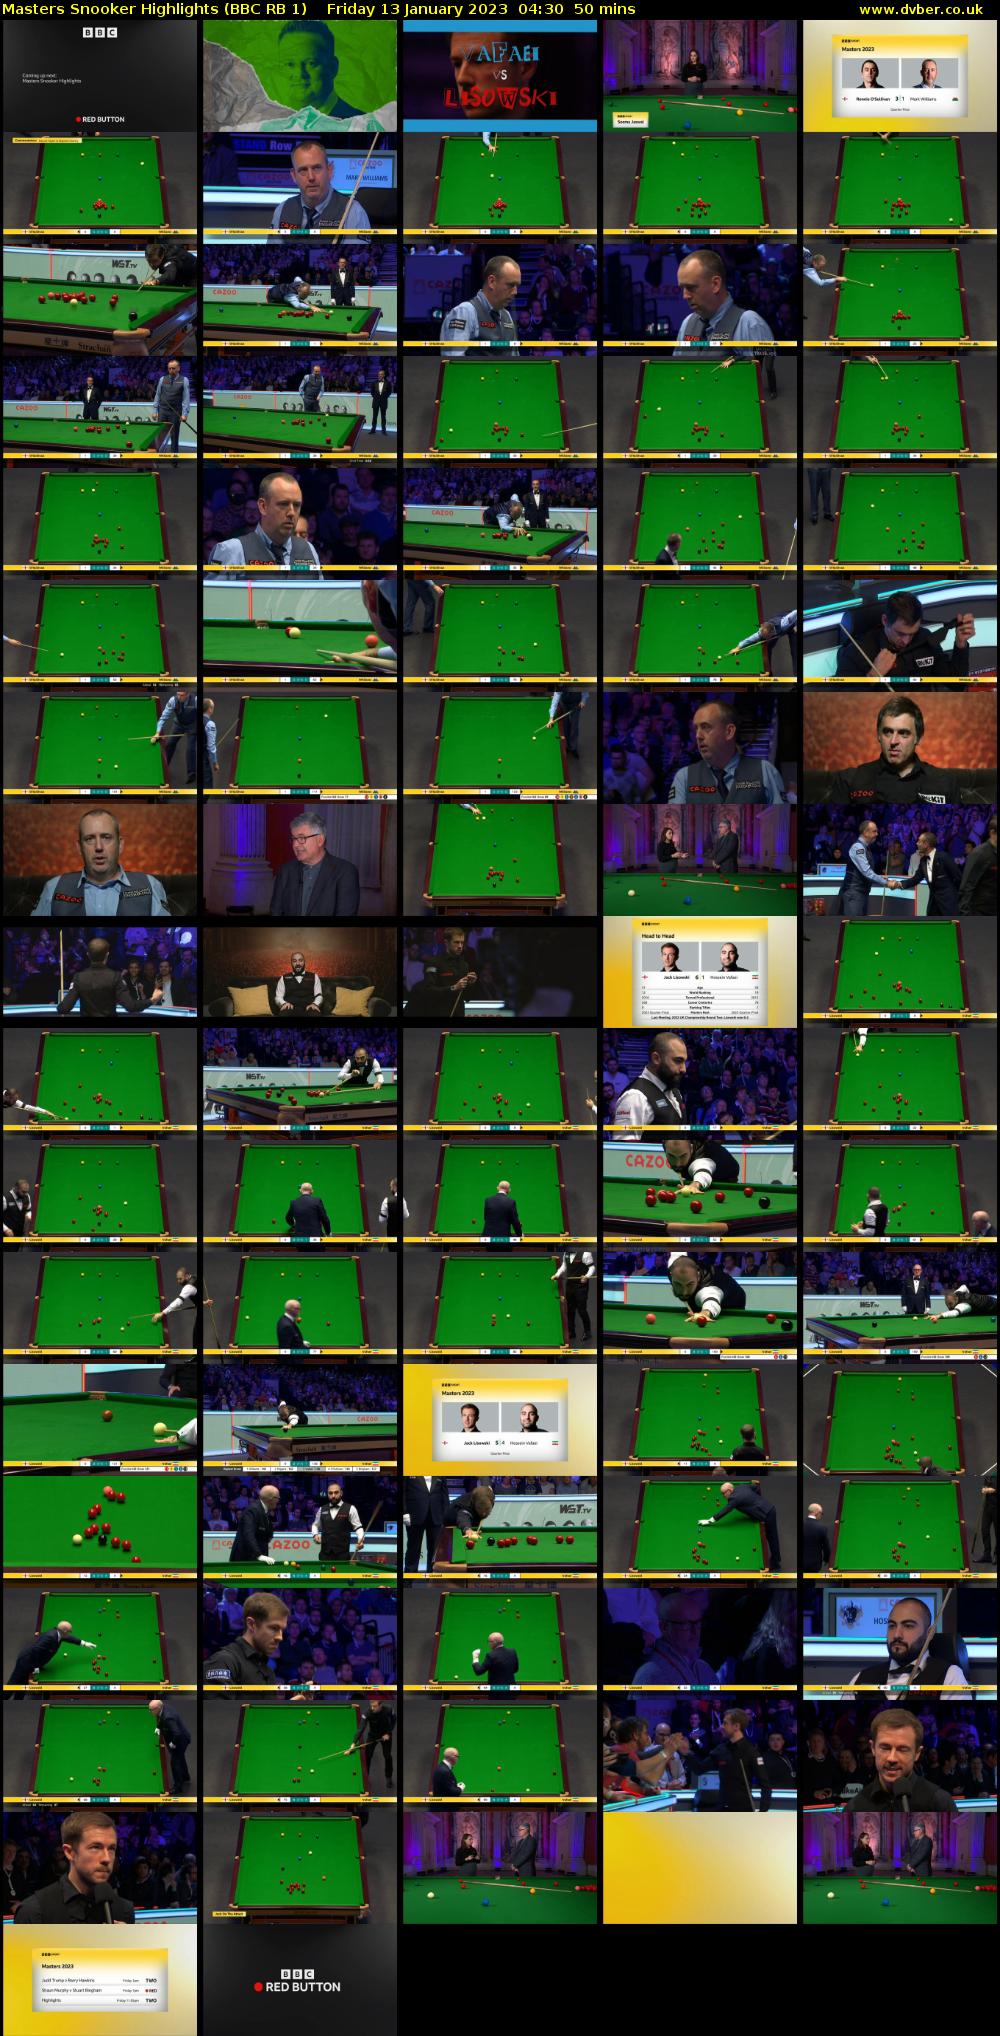 Masters Snooker Highlights (BBC RB 1) Friday 13 January 2023 04:30 - 05:20